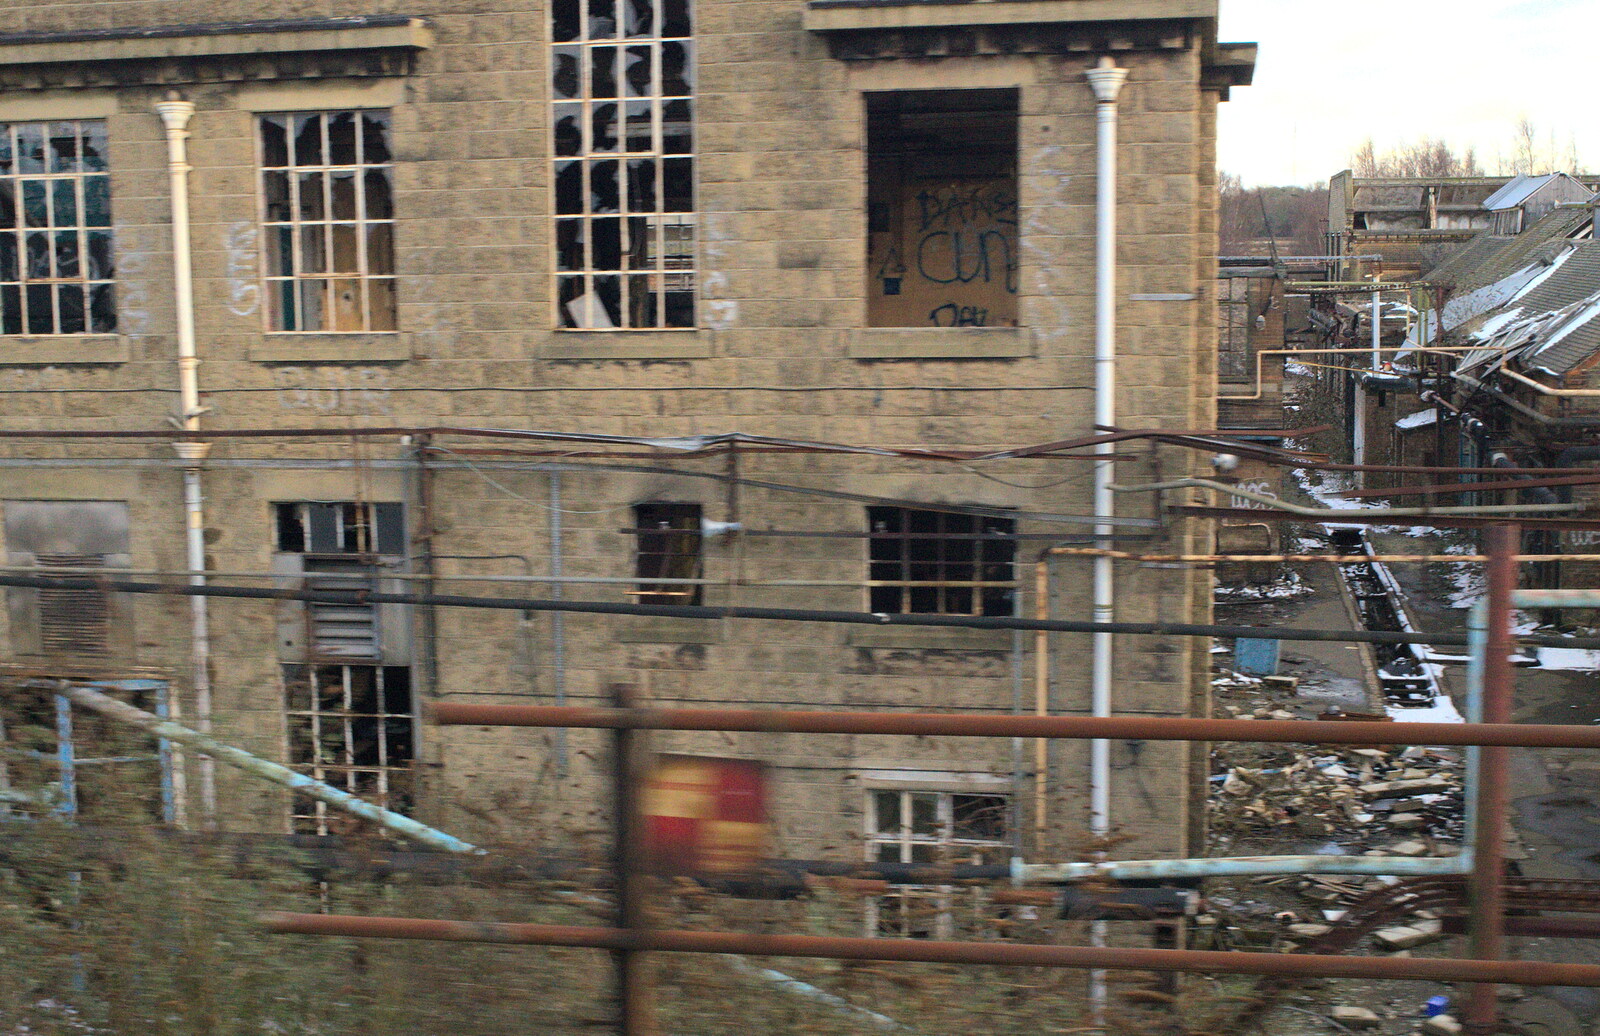 Smashed windows in a stone building from Bramford Dereliction and Marconi Demolition, Chelmsford - 12th March 2013